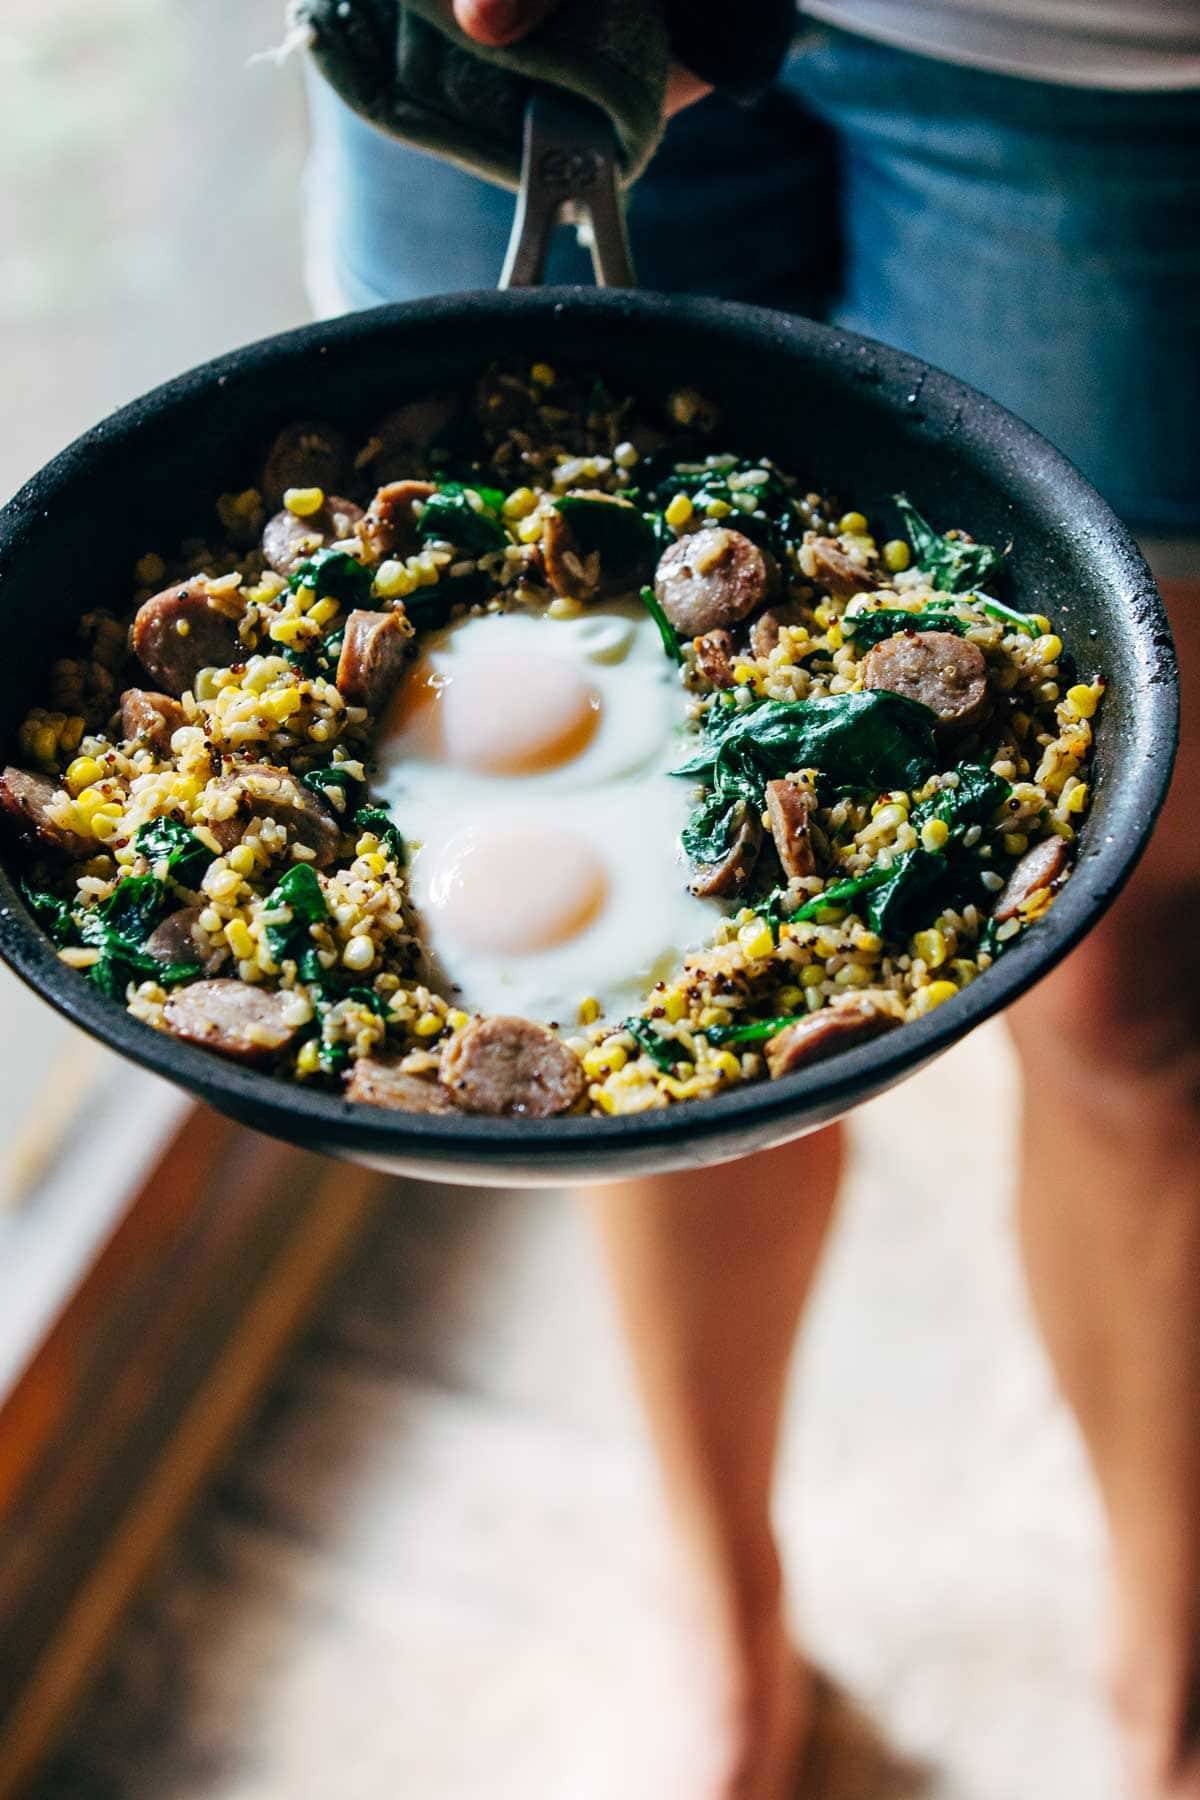 Skillet with eggs and sausage.